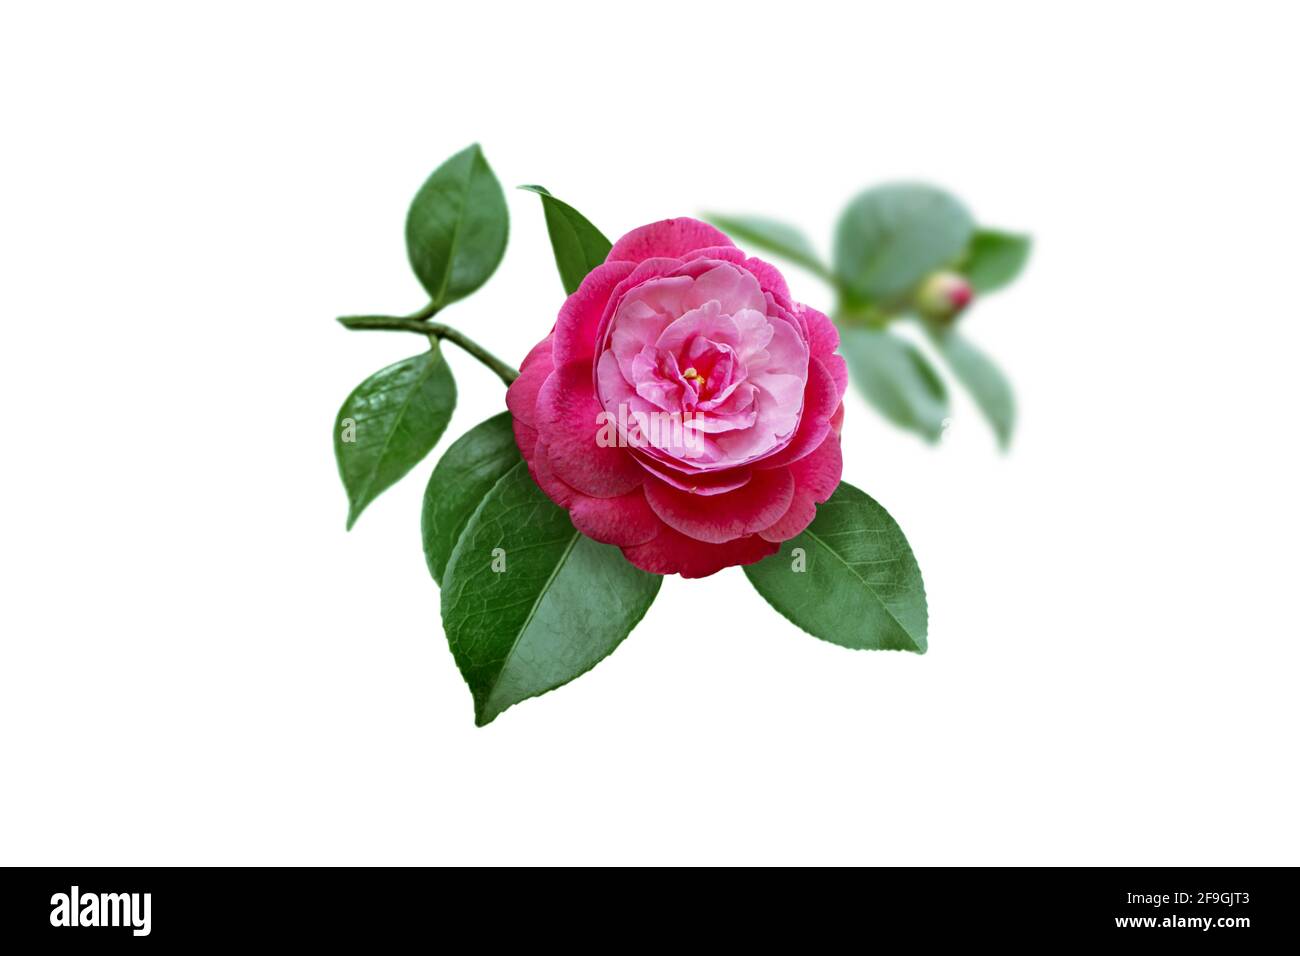 Bright pink camellia japanese peony form flower, leaves and bud isolated on white. Stock Photo